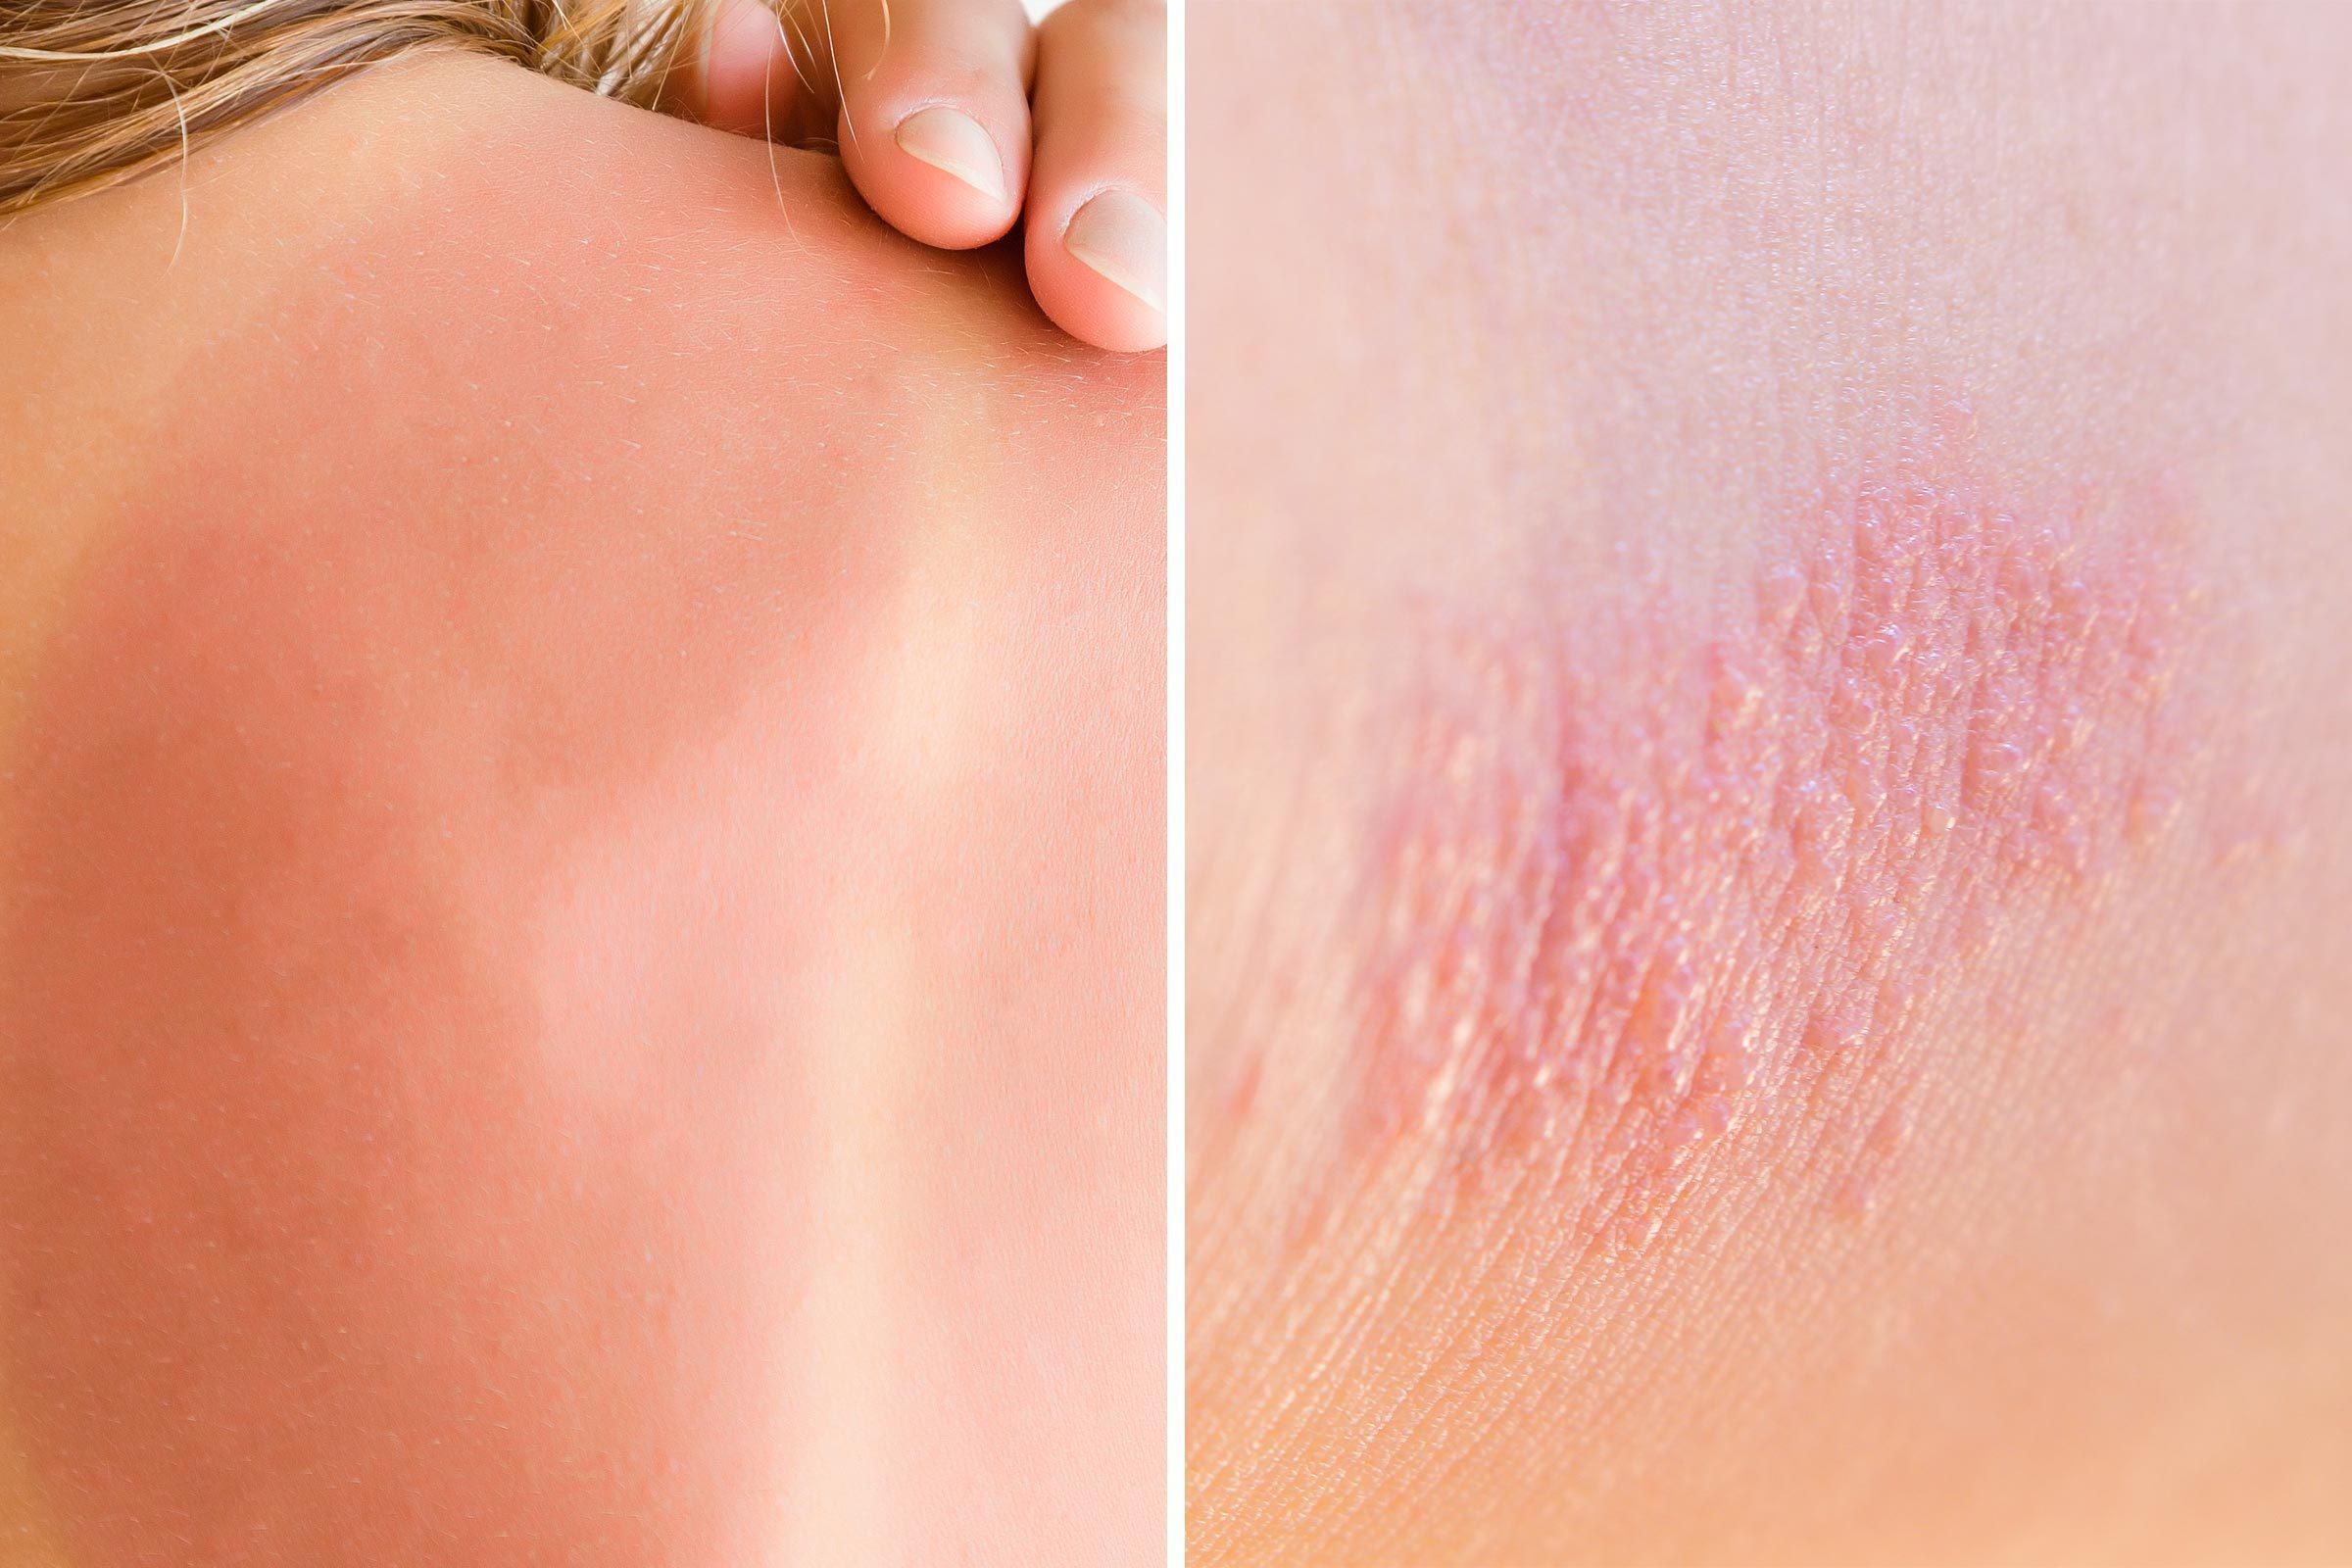 Heat Rash or Sunburn: Here’s How to Tell the Difference | Reader's Digest